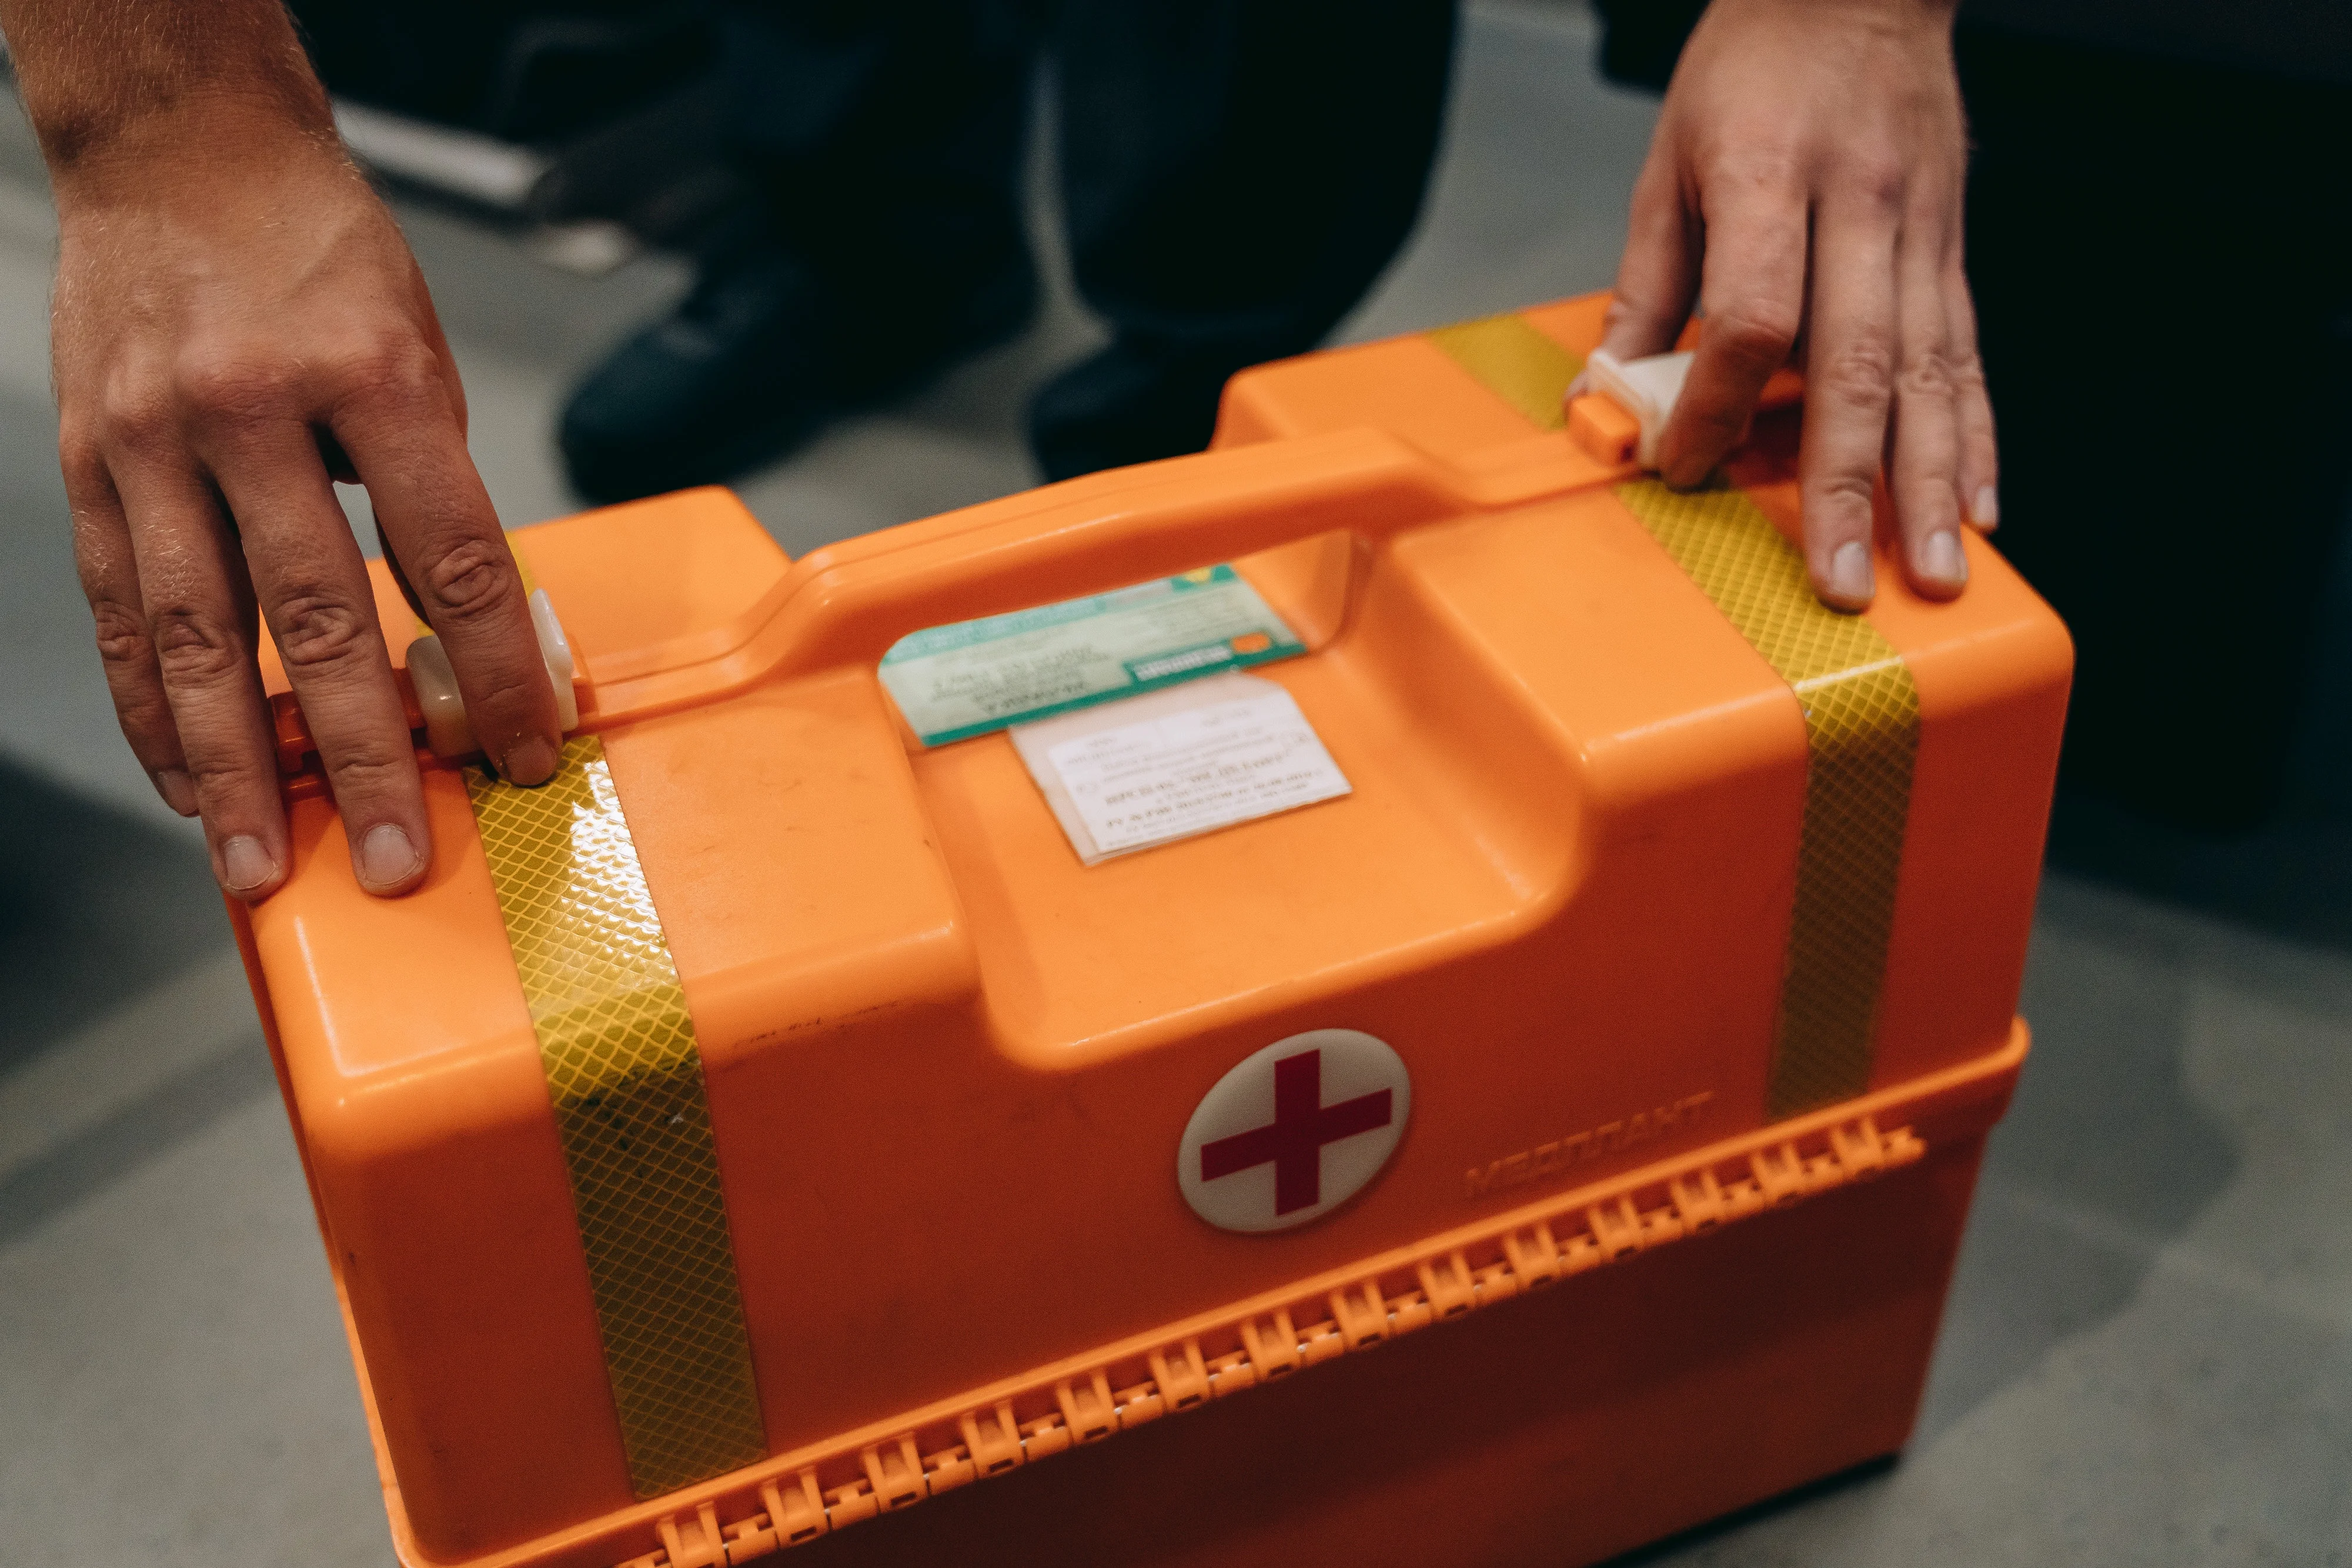 image of an emergency kit